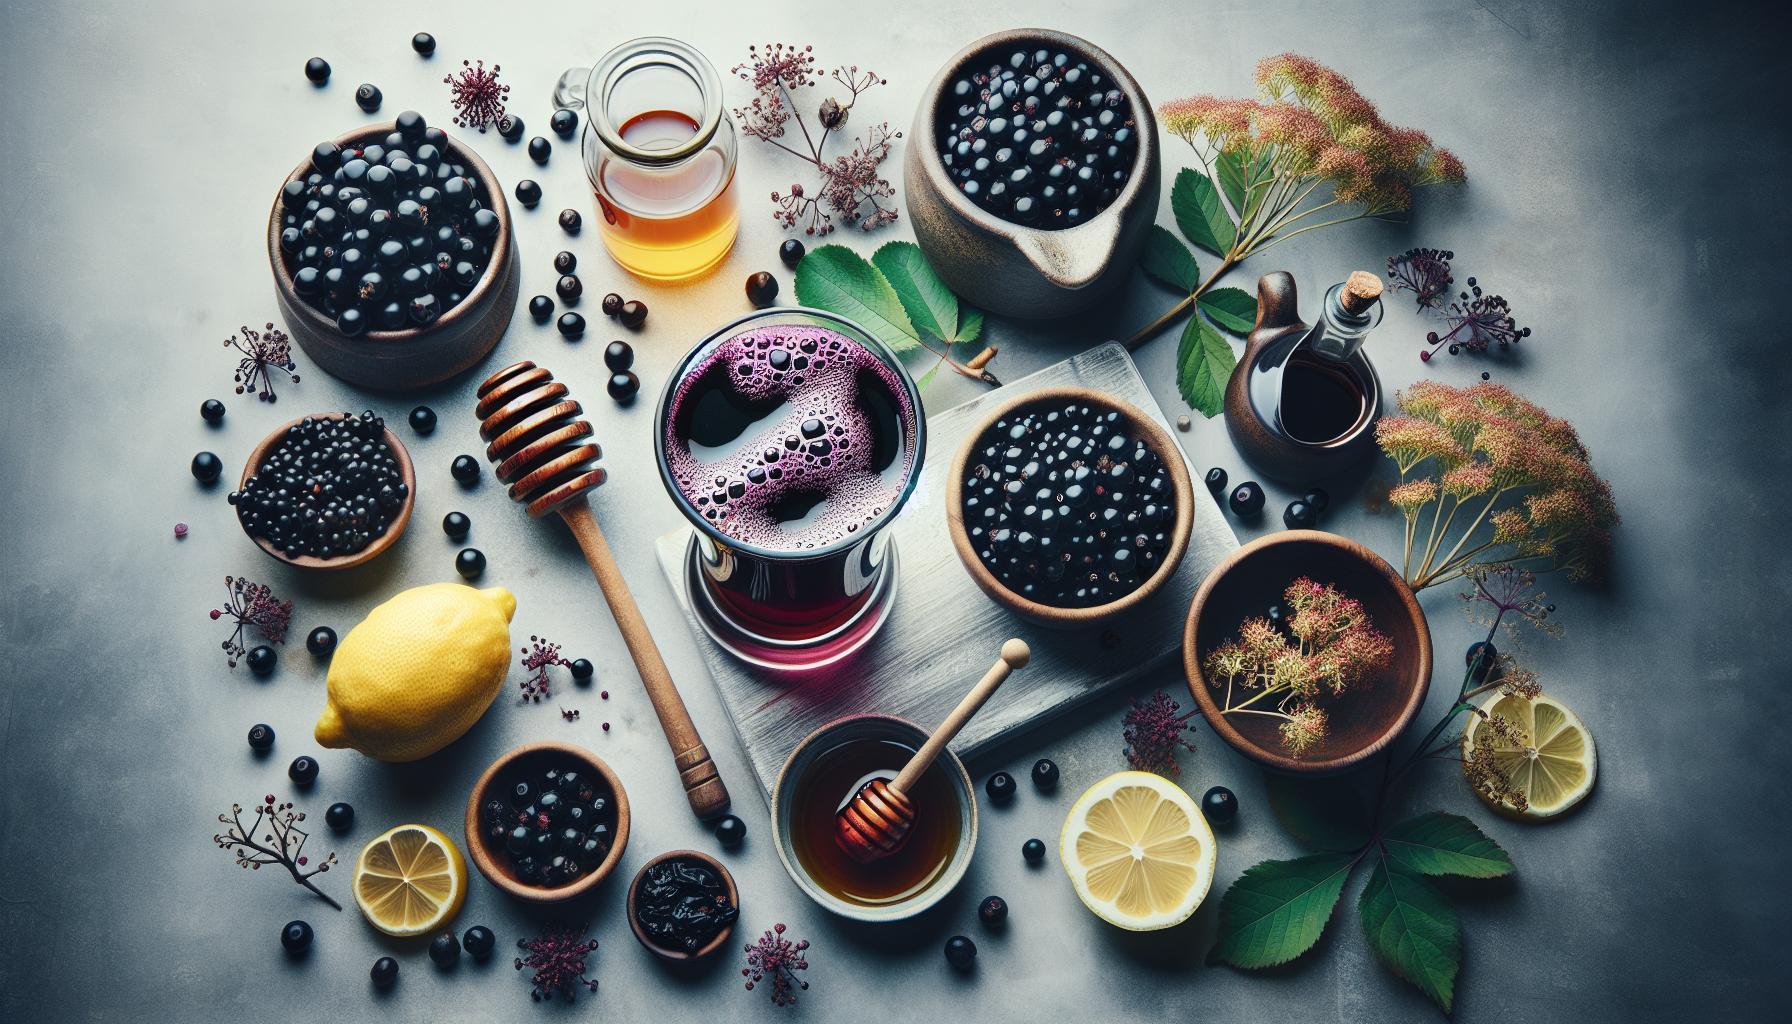 Boost Your Immunity with This Homemade Elderberry Elixer Recipe – Healthful & Delicious